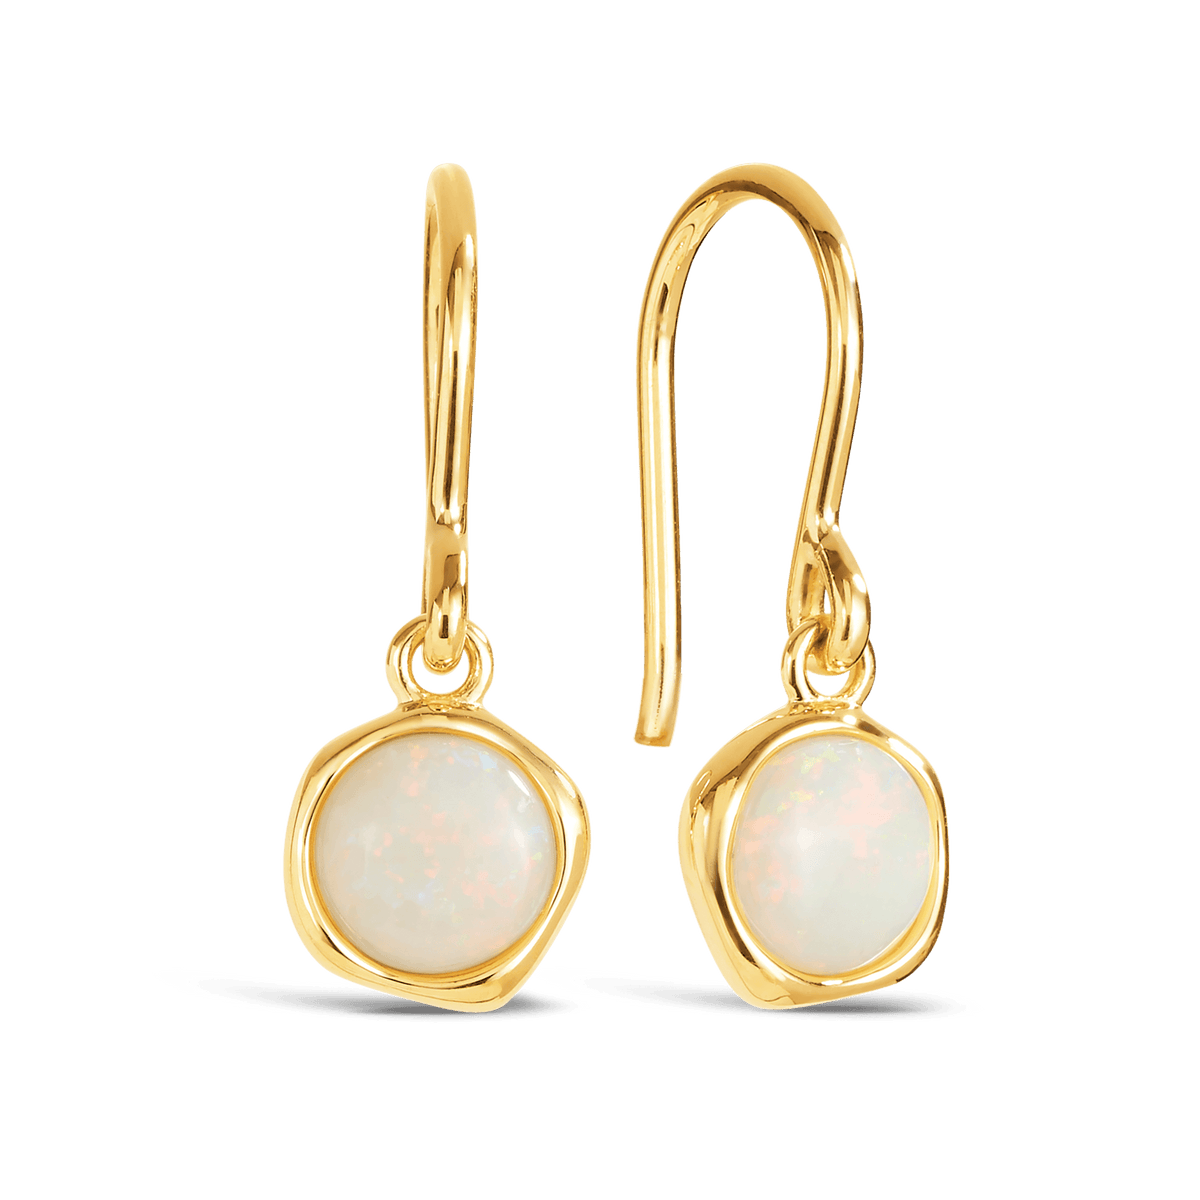 Solid Opal Earrings in 9ct Yellow Gold - Wallace Bishop